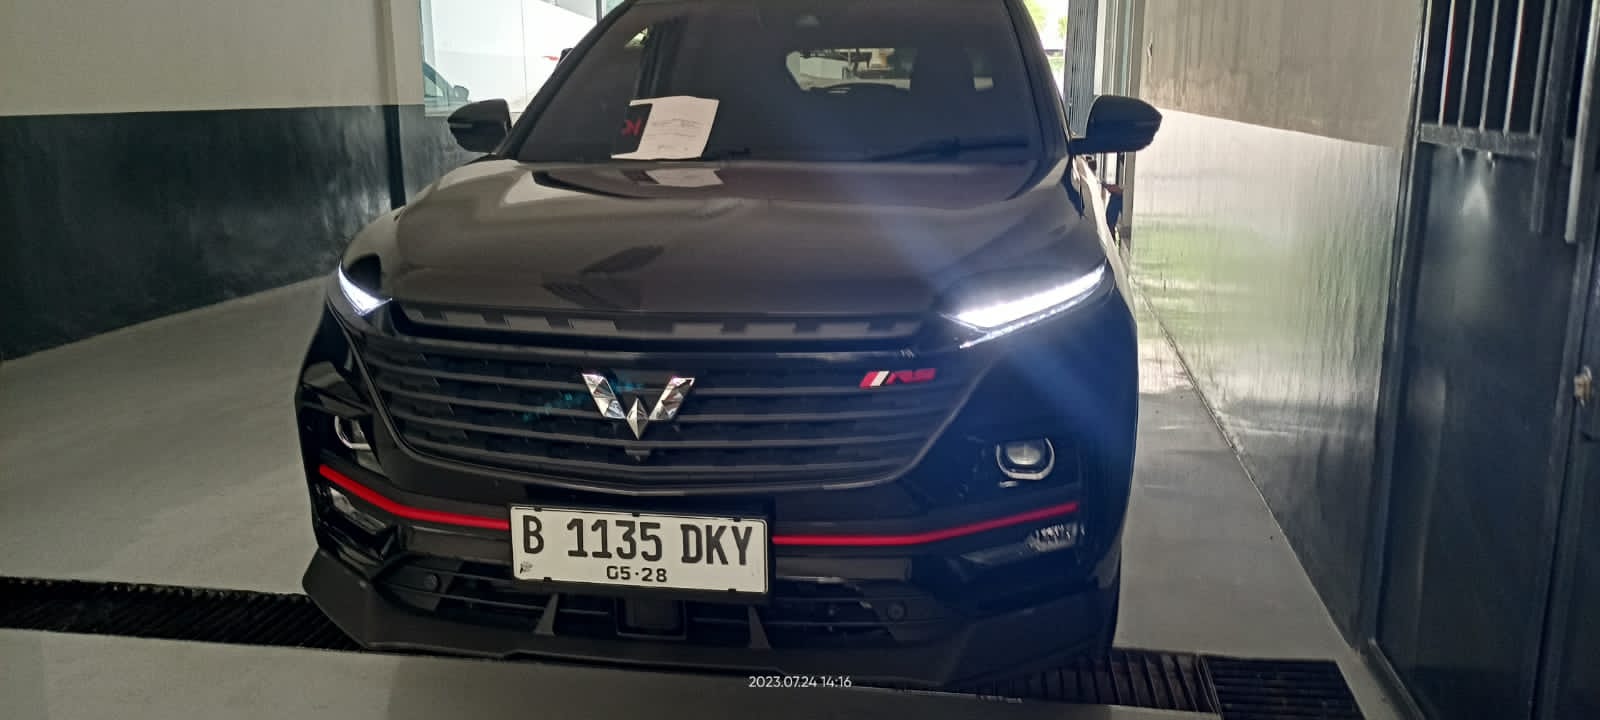 2022 Wuling Almaz 1.5 TURBO LUX AT 1.5 TURBO LUX AT bekas